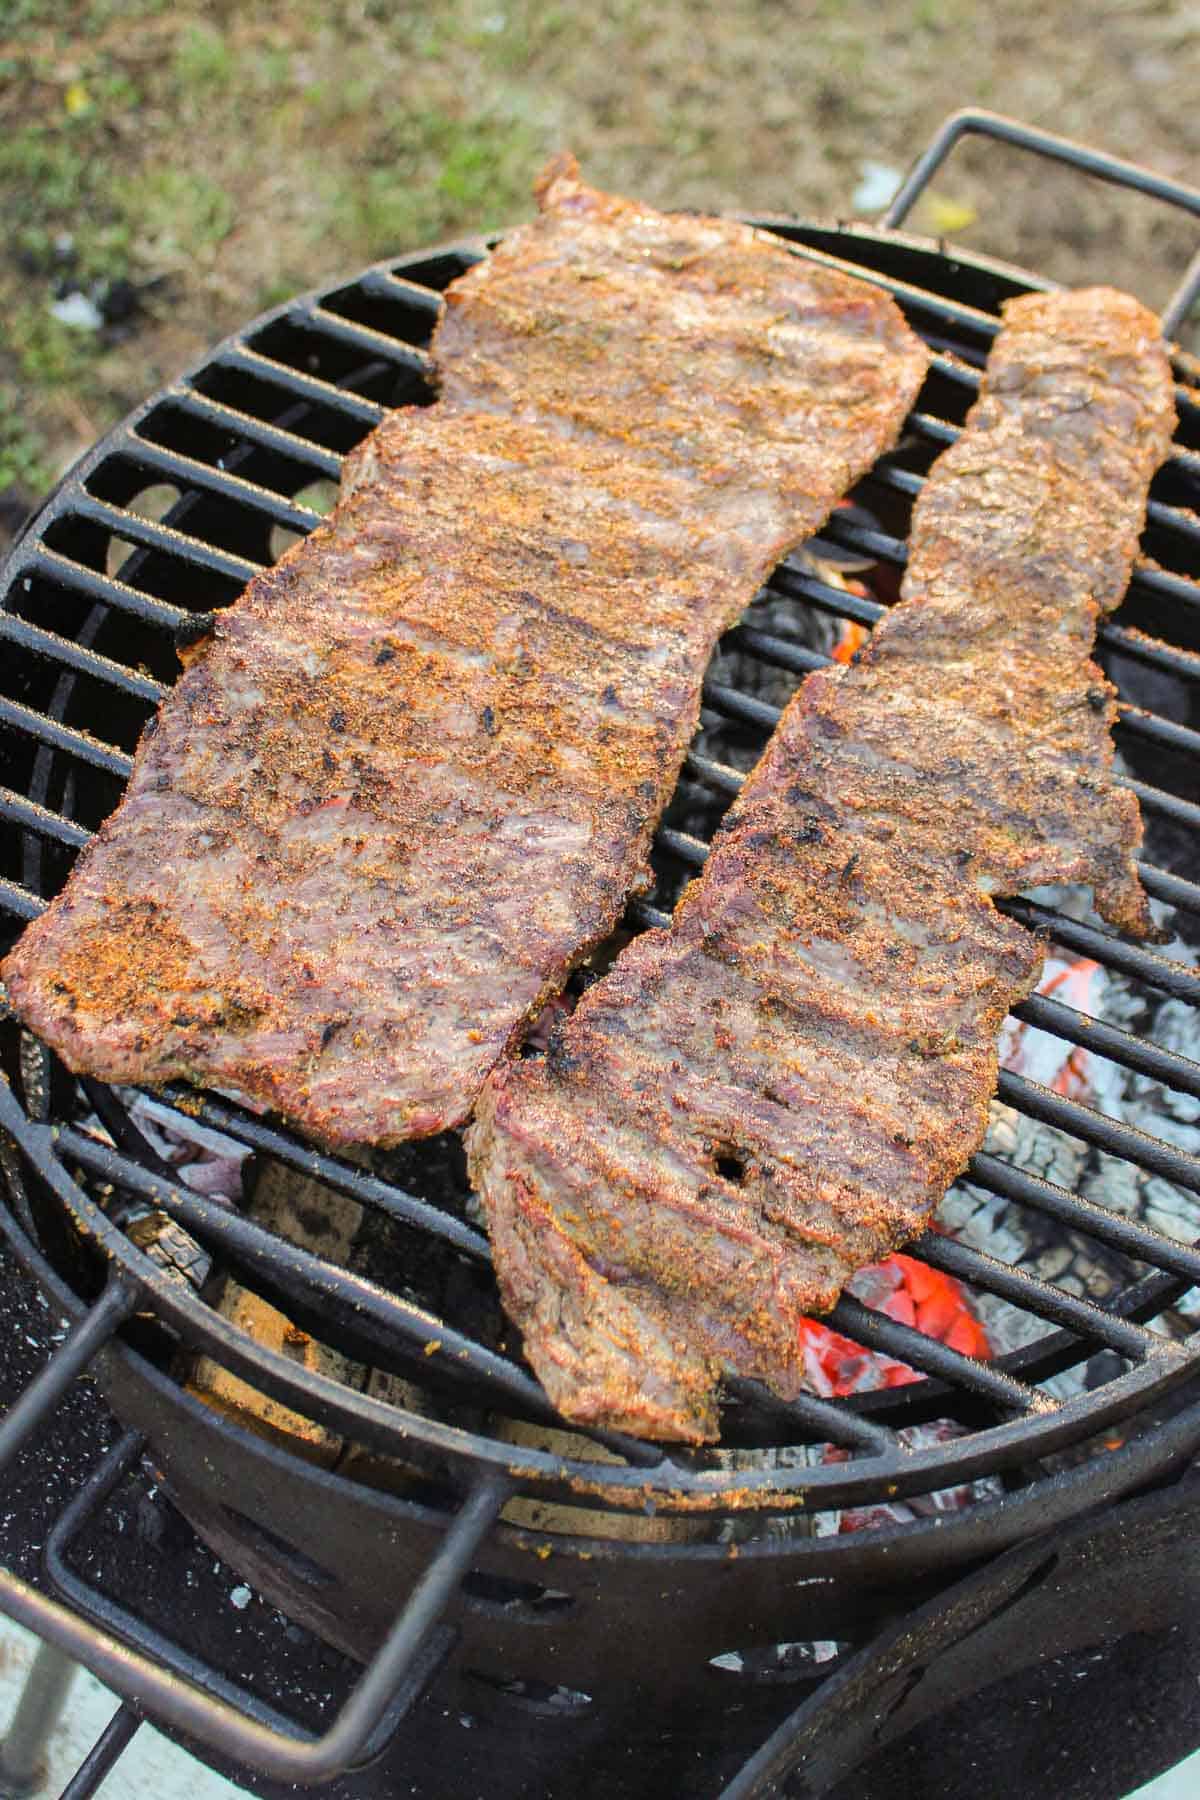 The two large skirt steaks cooking on the grill.